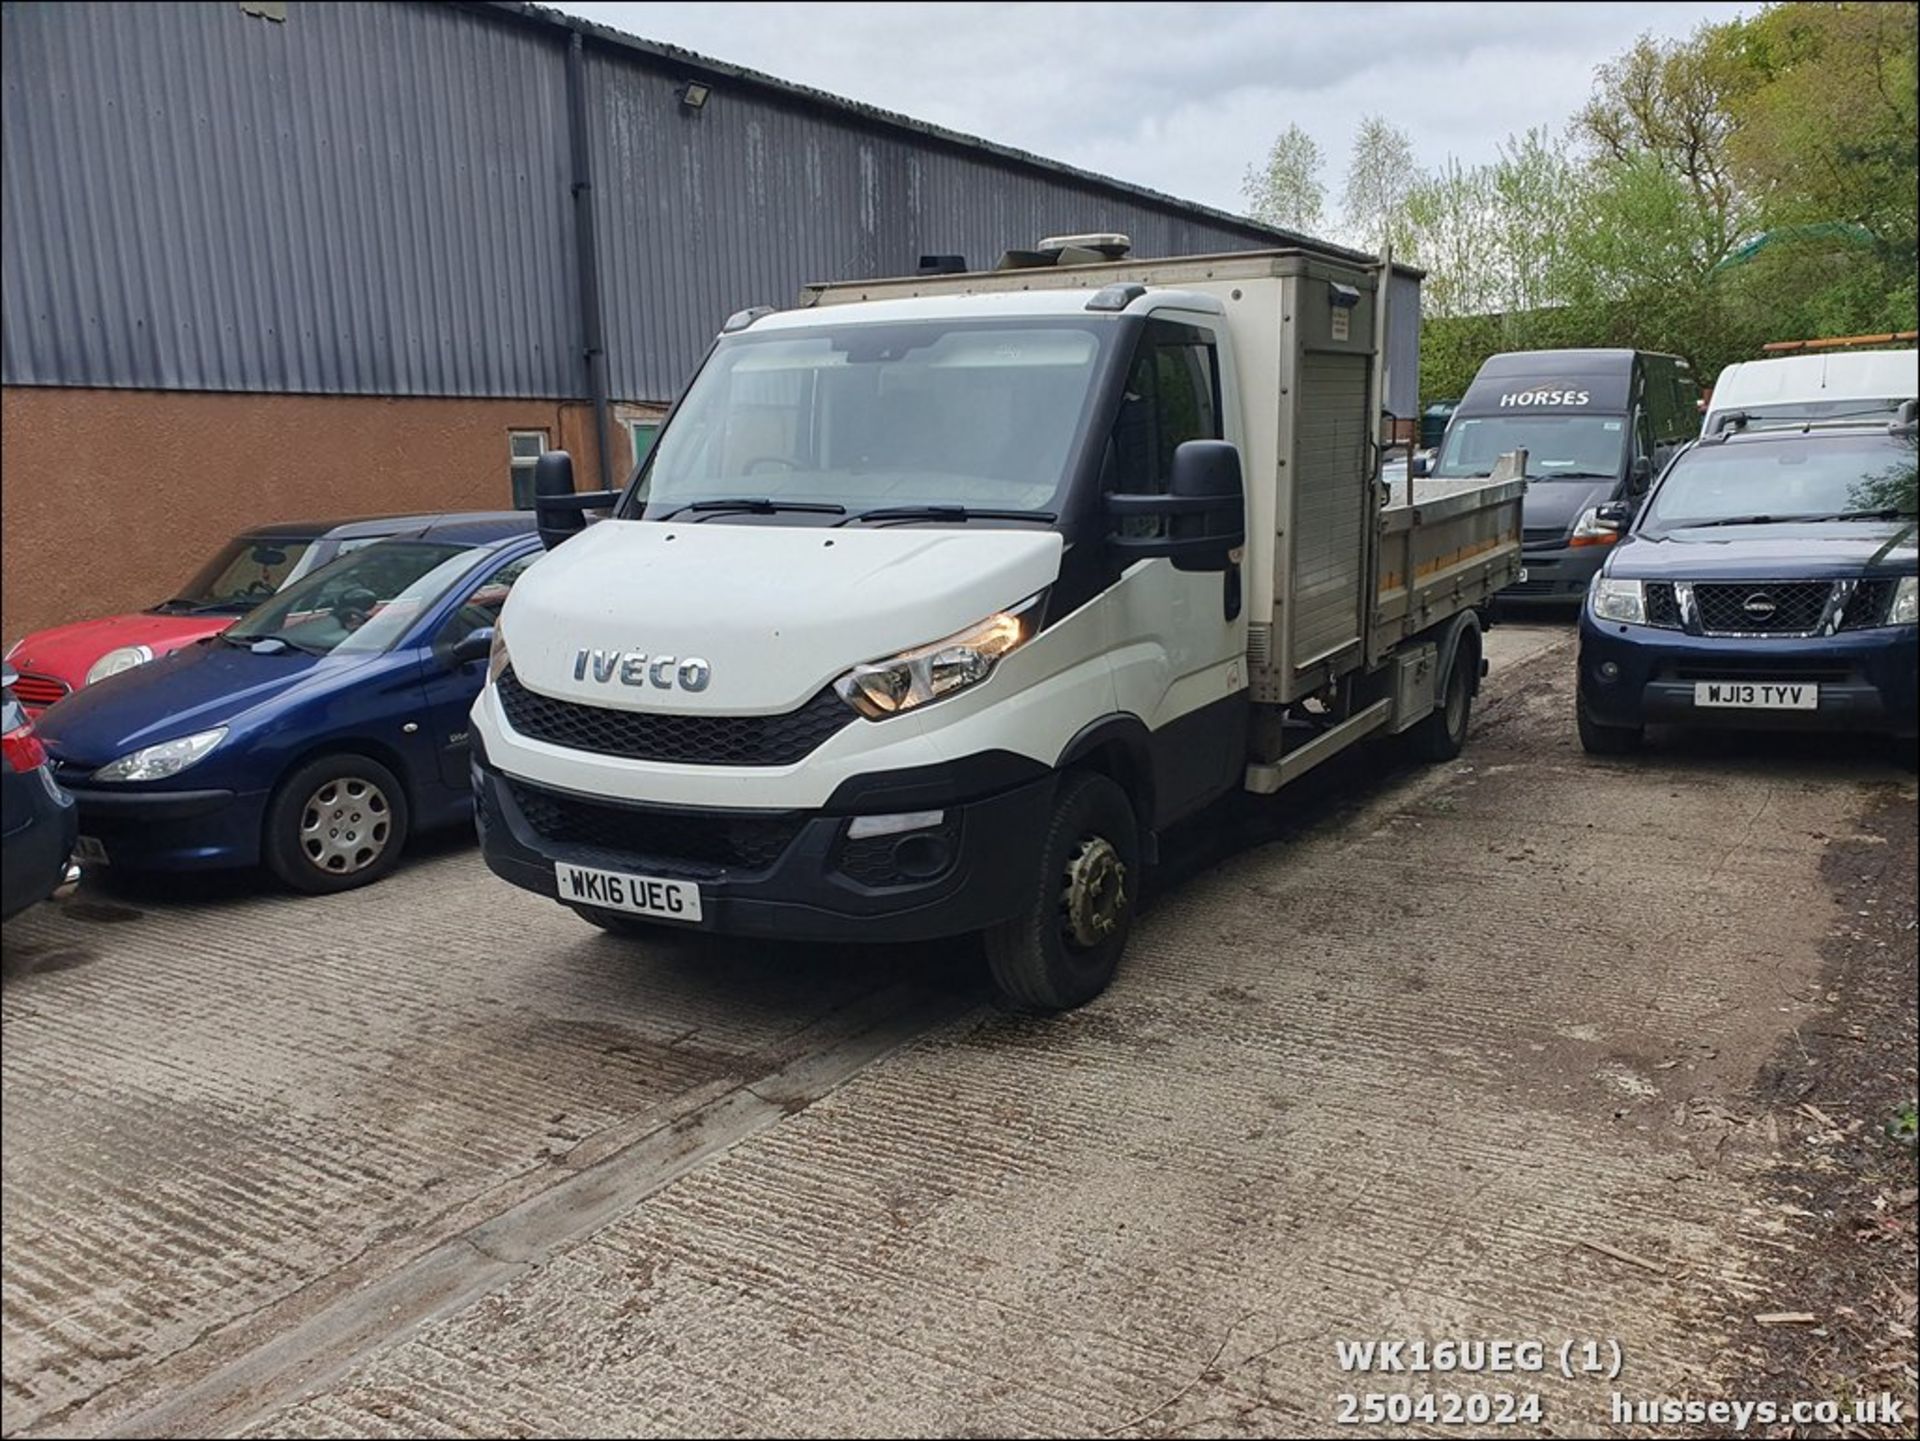 16/16 IVECO DAILY 70C17 - 2998cc 2dr Tipper (White, 193k) - Image 3 of 28